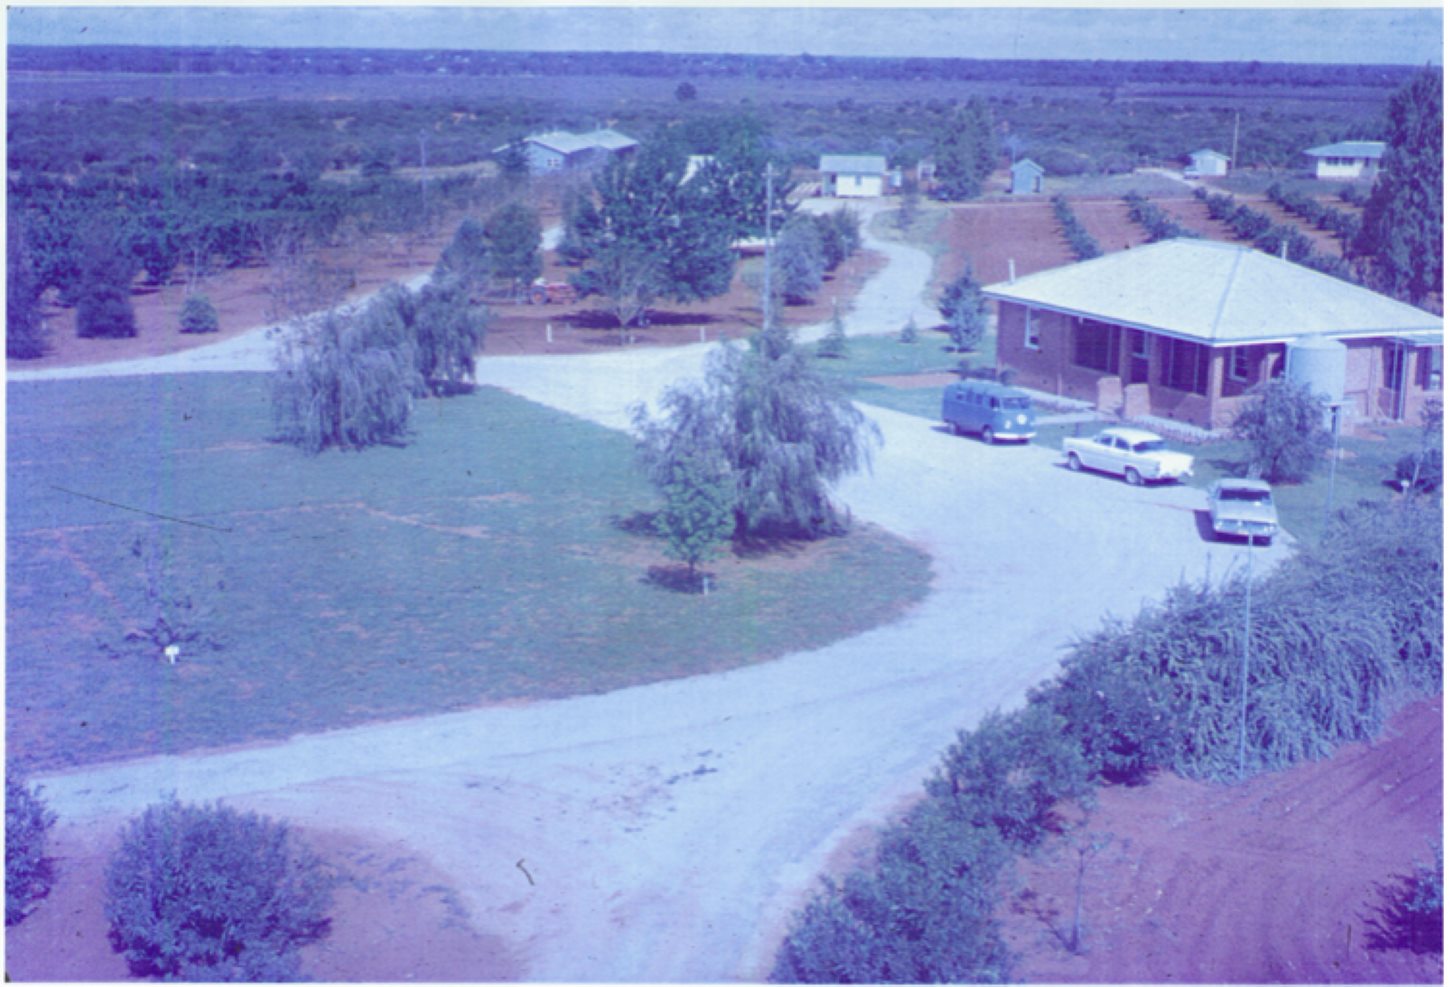 1960 view from water tower